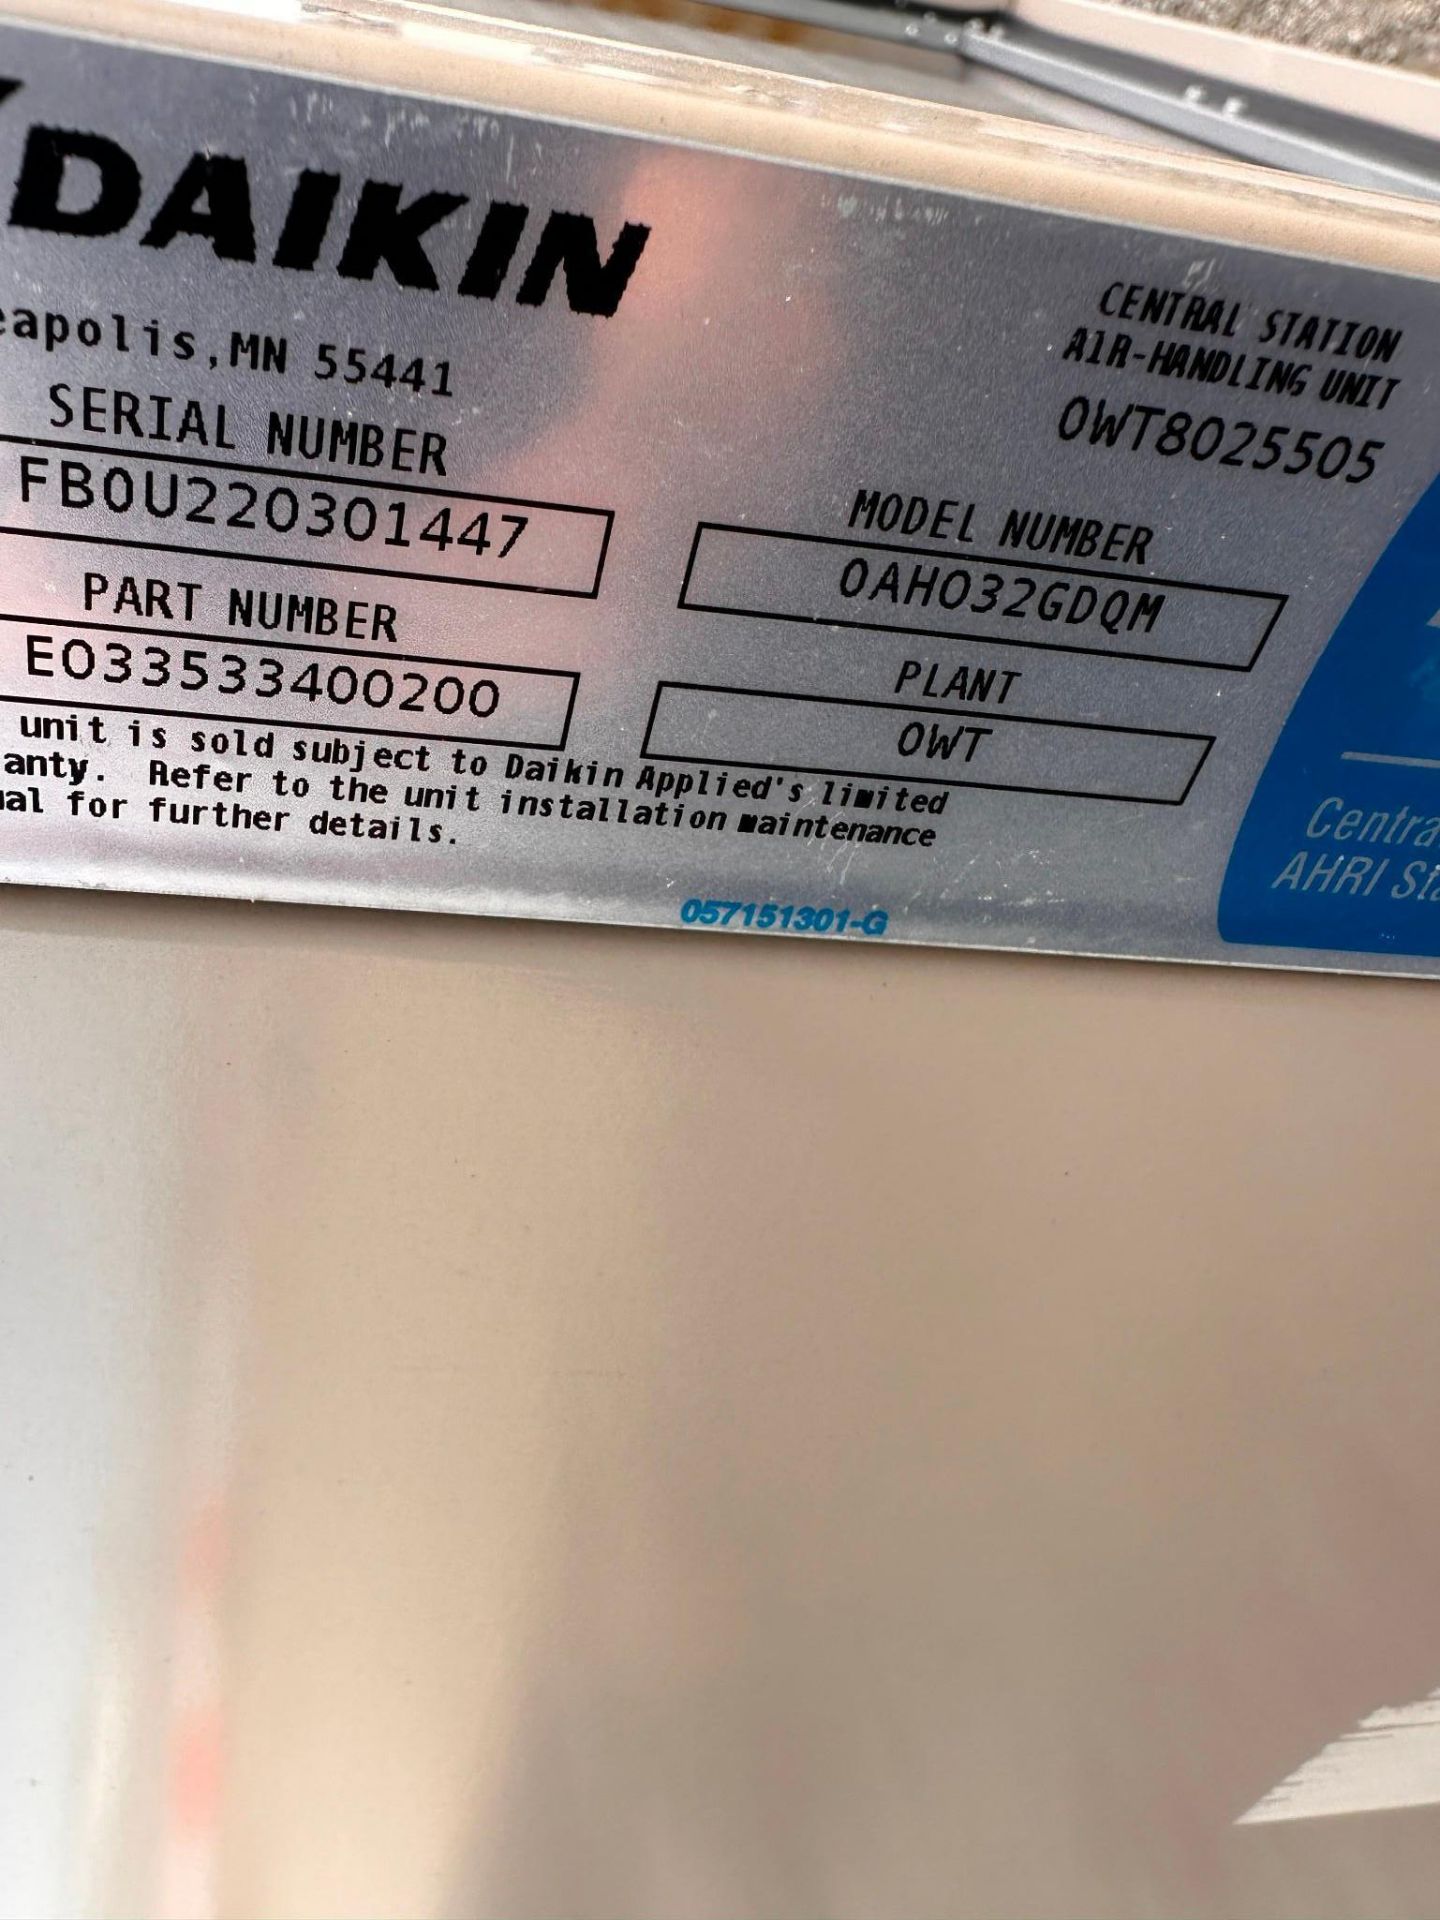 DAIKIN MODEL OAH 032GDQM CLEAR AIR PACKAGED AIR CONDITIONING UNIT - Image 24 of 31